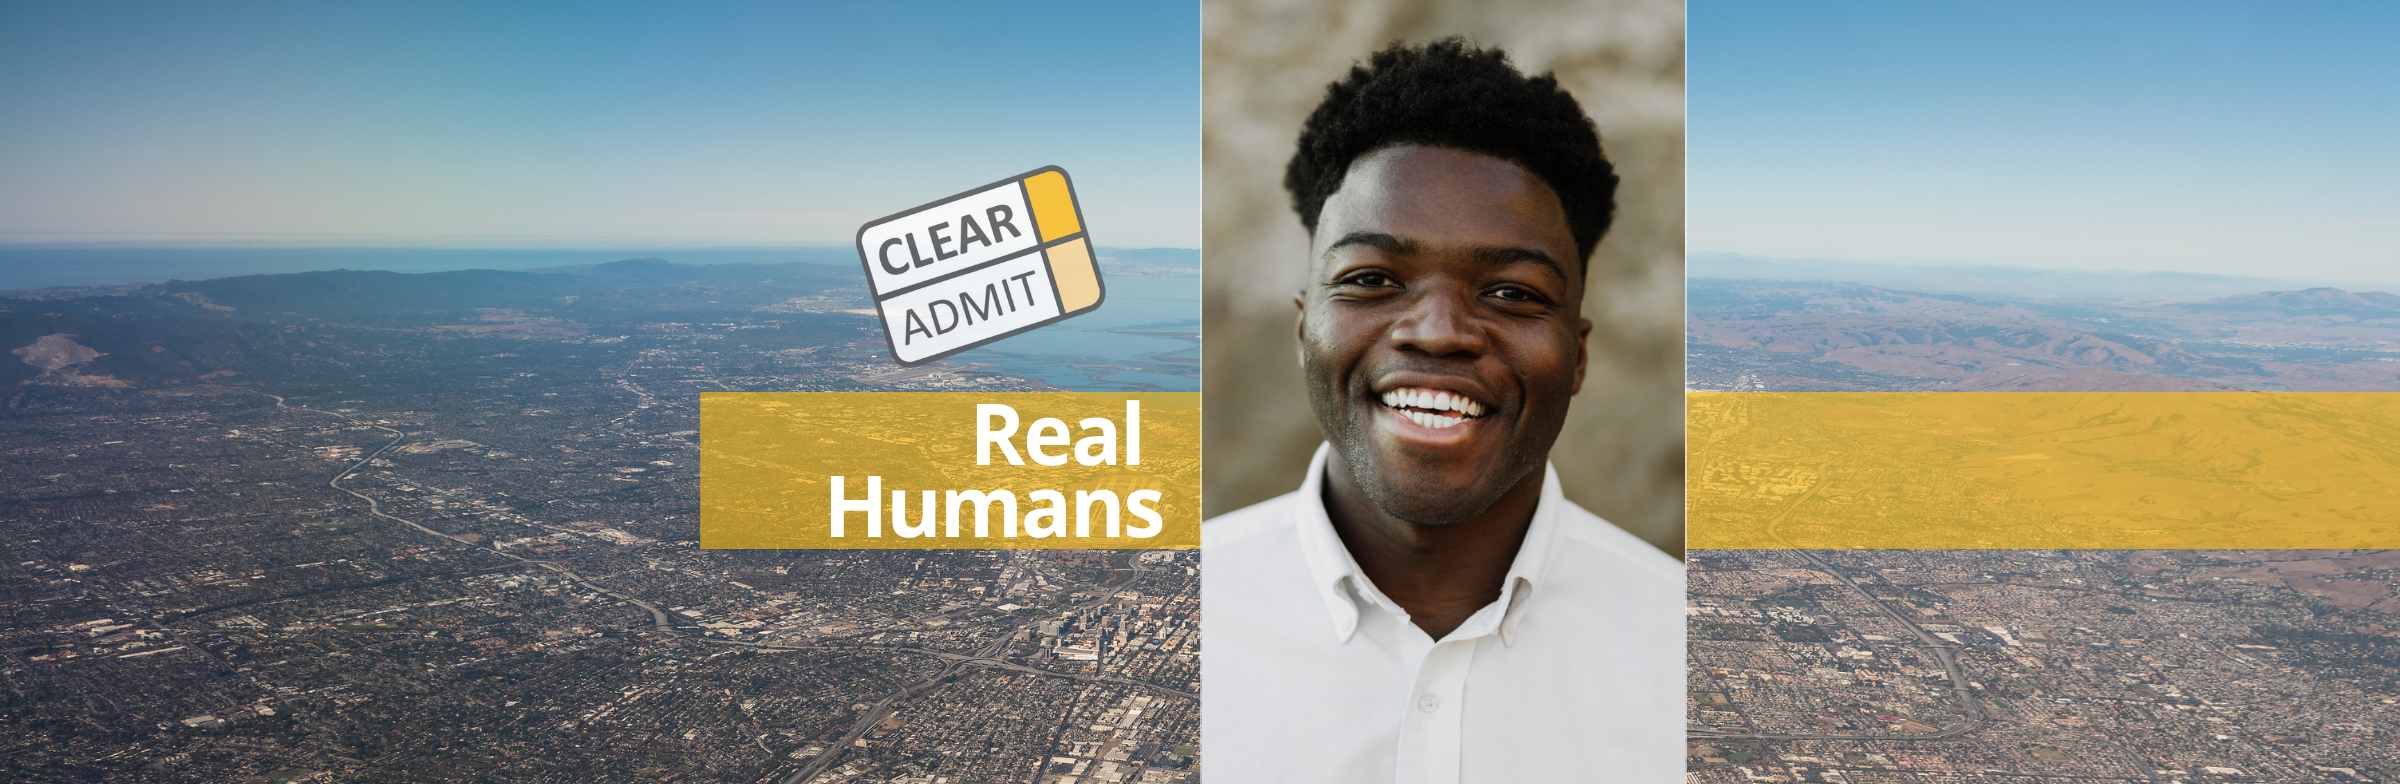 Image for Real Humans of Google: Chris Ouayoro, USC Marshall MBA ’20, Sr. Financial Analyst